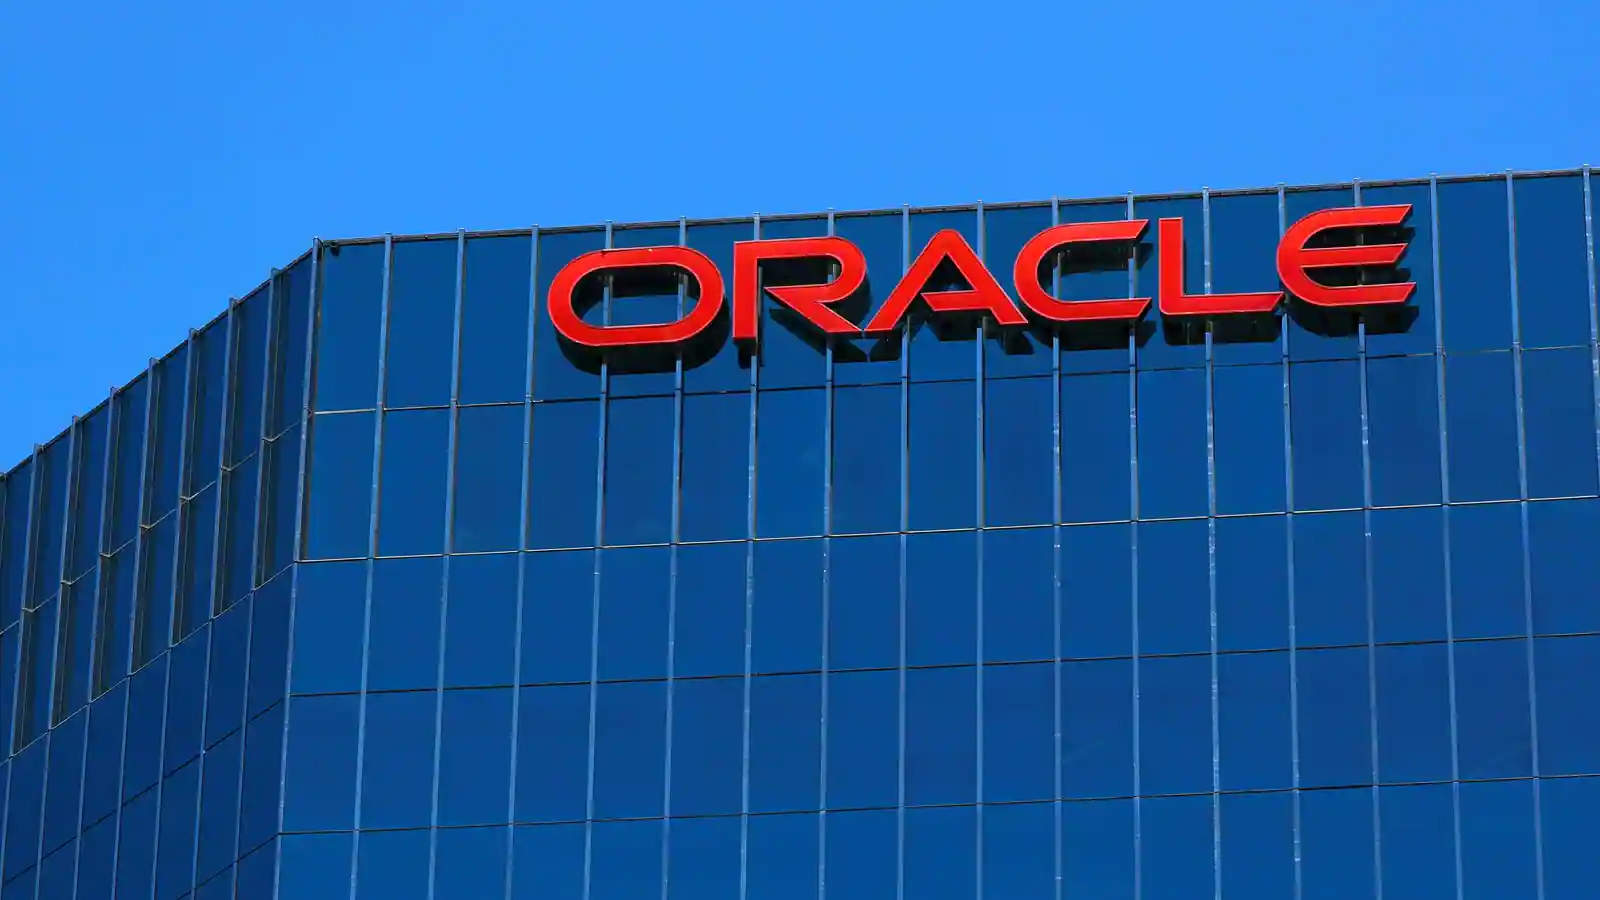 railway ministry begins an investigation against oracle following sec order 2022.